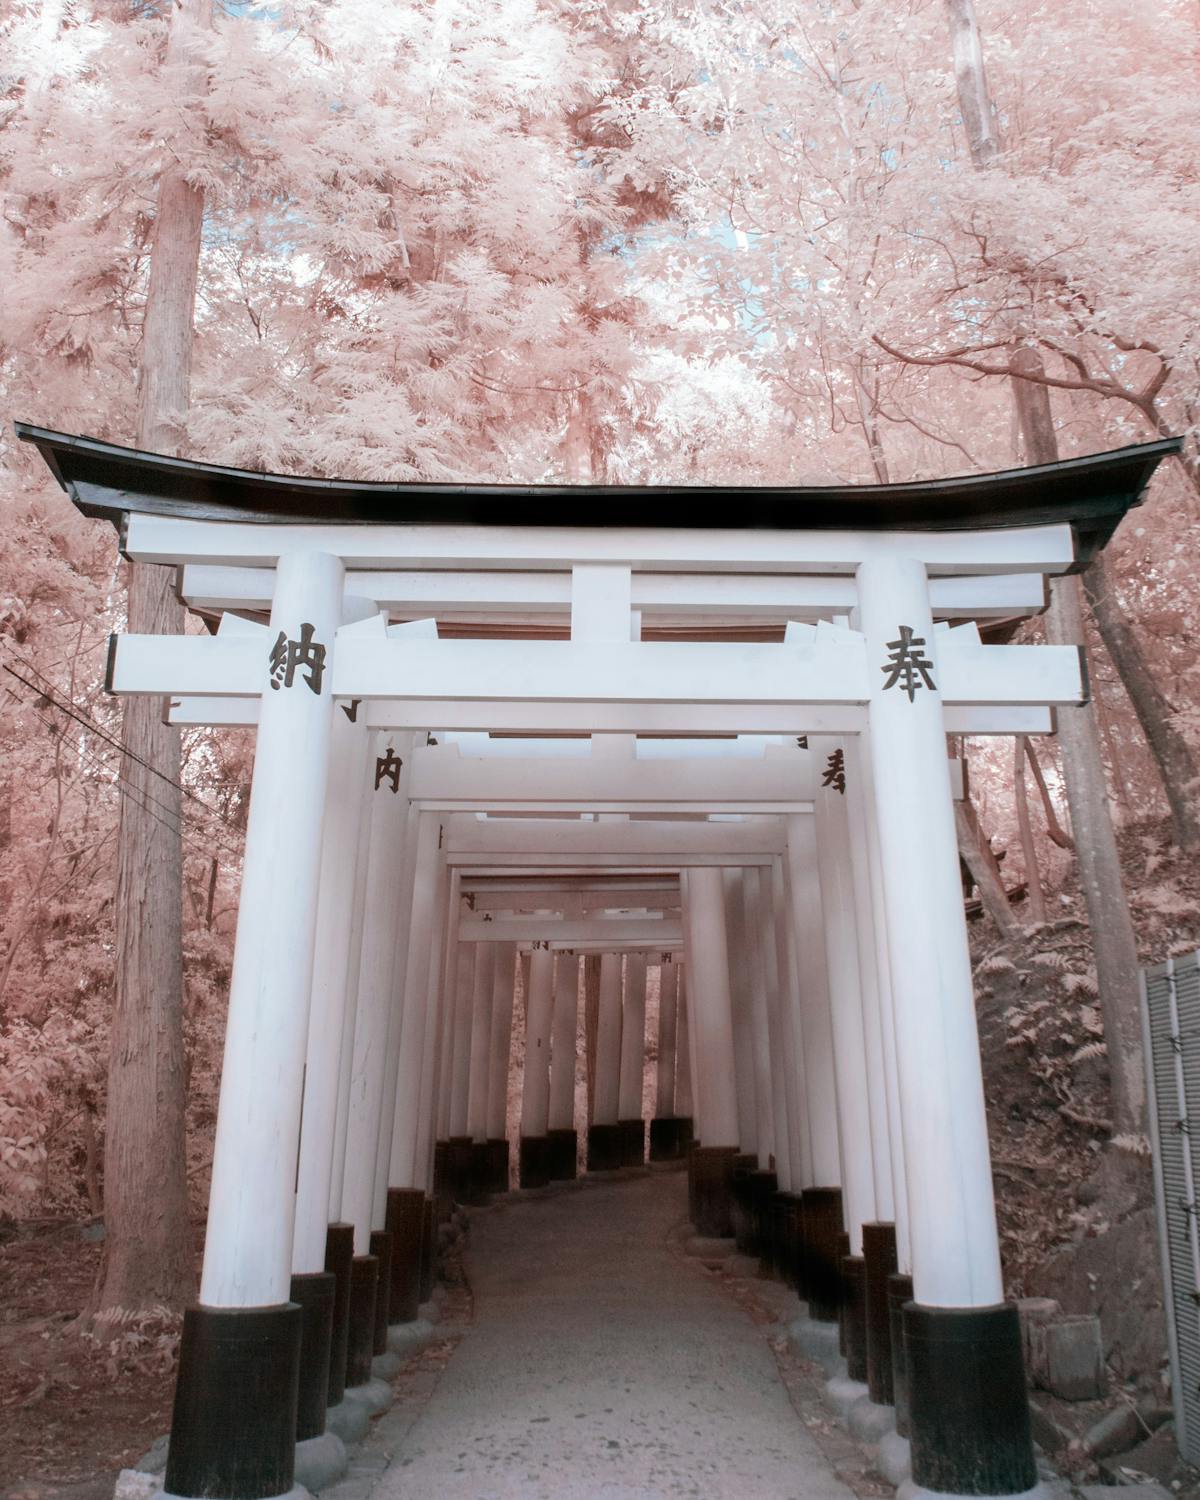 Infrared photography of a shrine